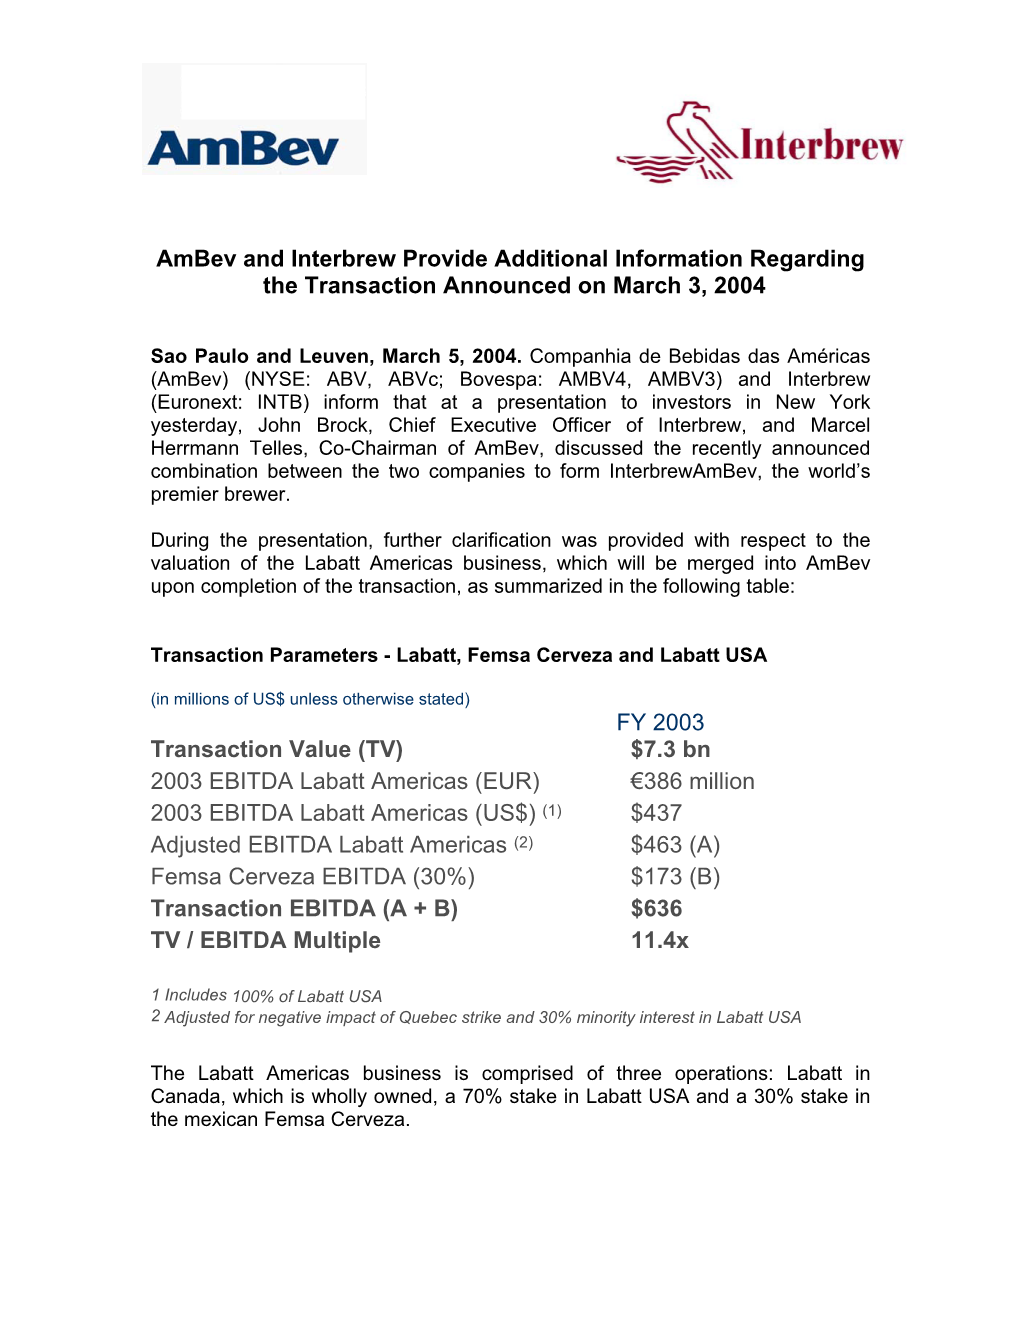 Ambev and Interbrew Provide Additional Information Regarding the Transaction Announced on March 3, 2004